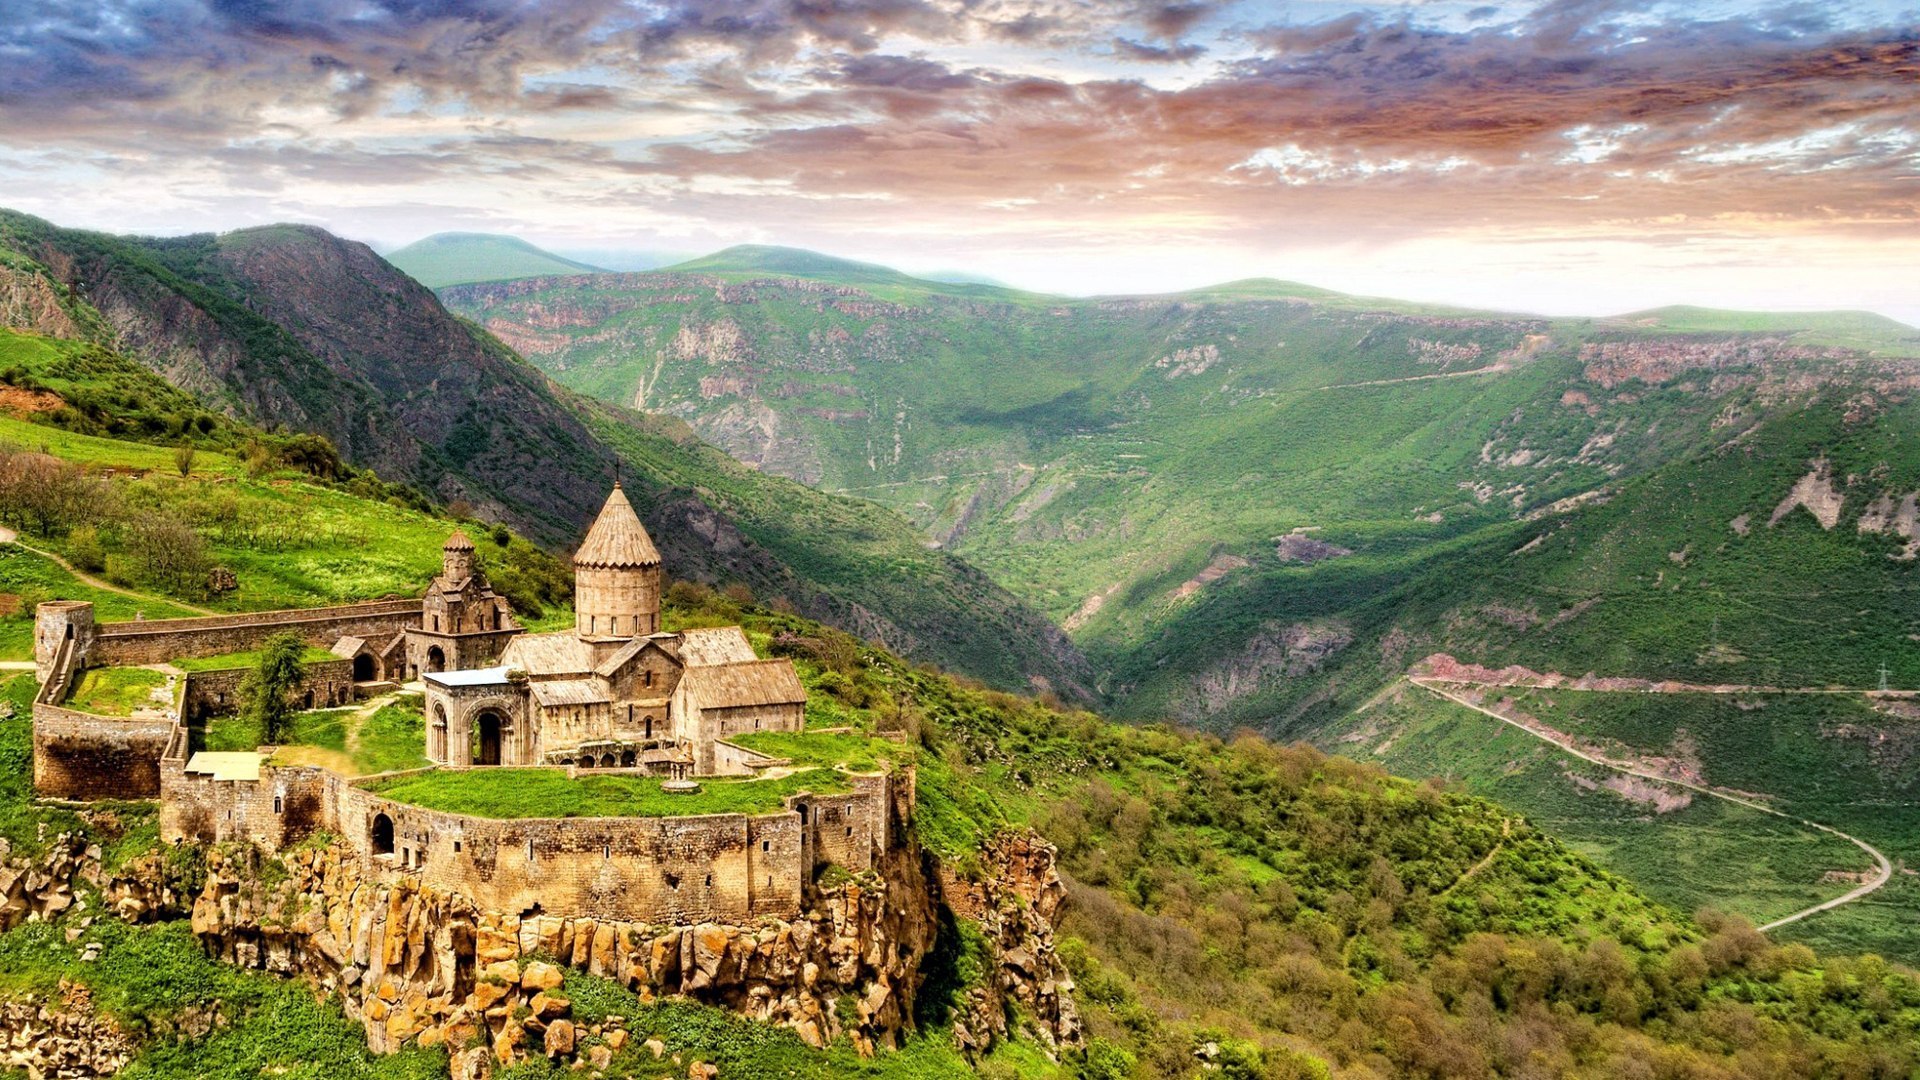 General 1920x1080 nature landscape trees forest castle monastery Armenia mountains stones valley hills clouds